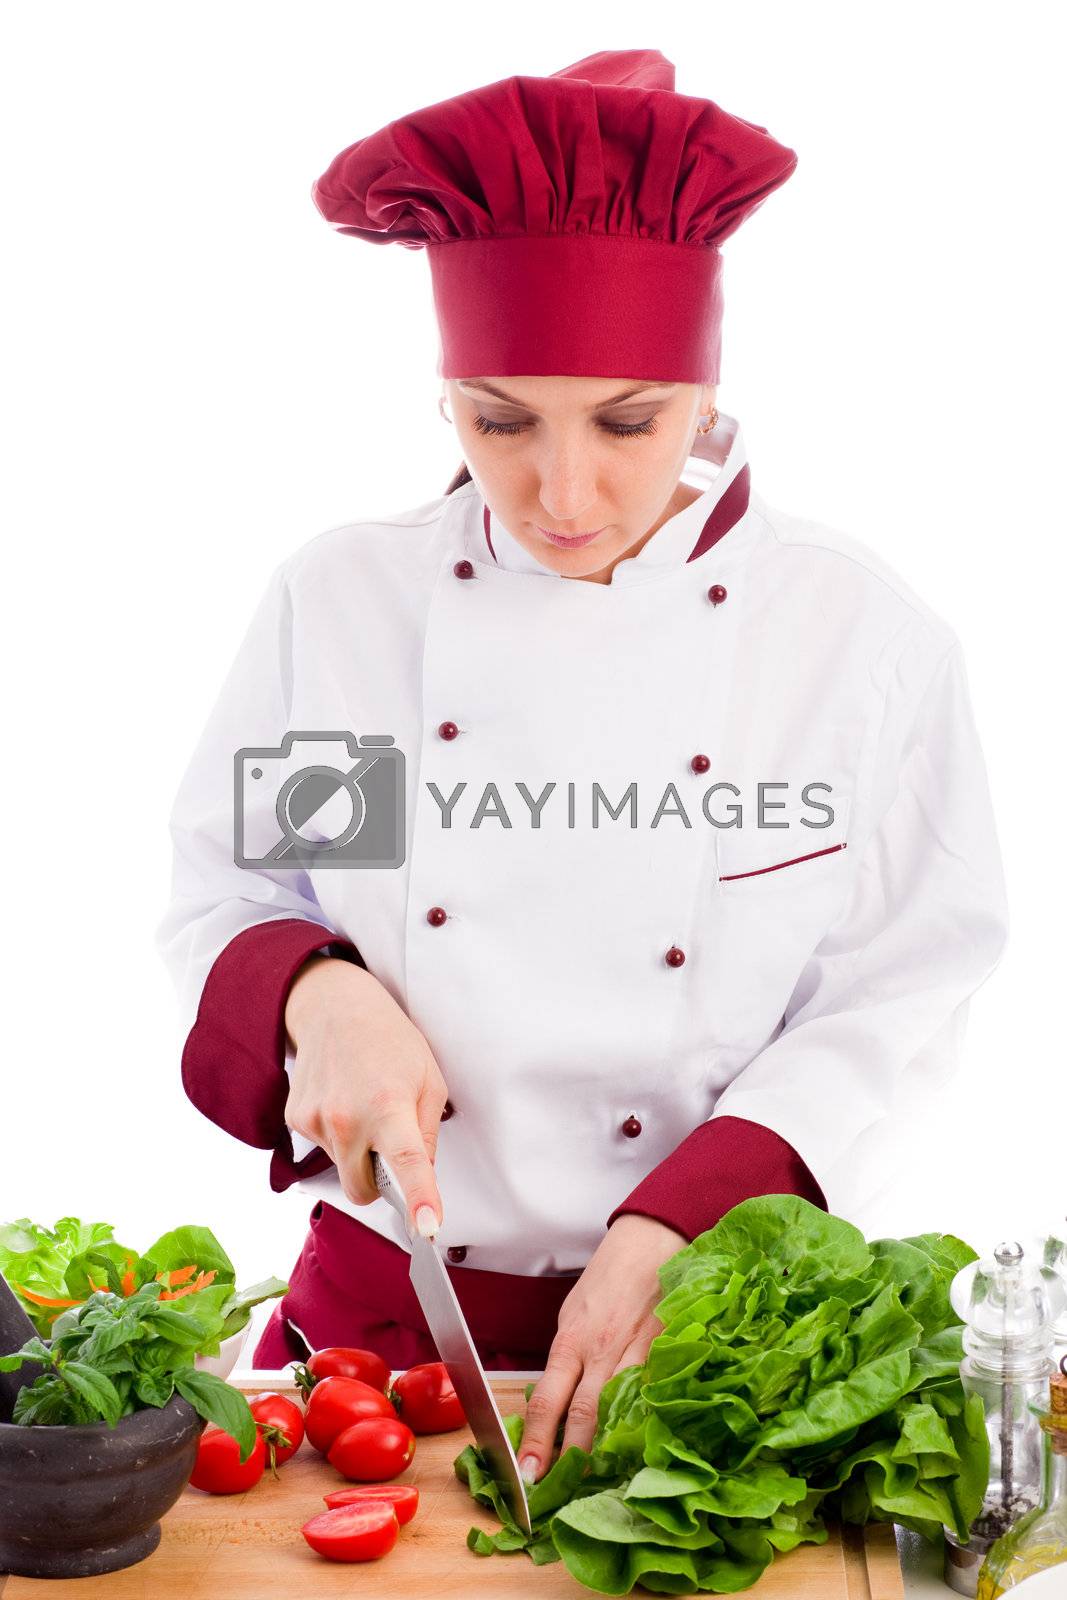 Royalty free image of Chef  by genious2000de